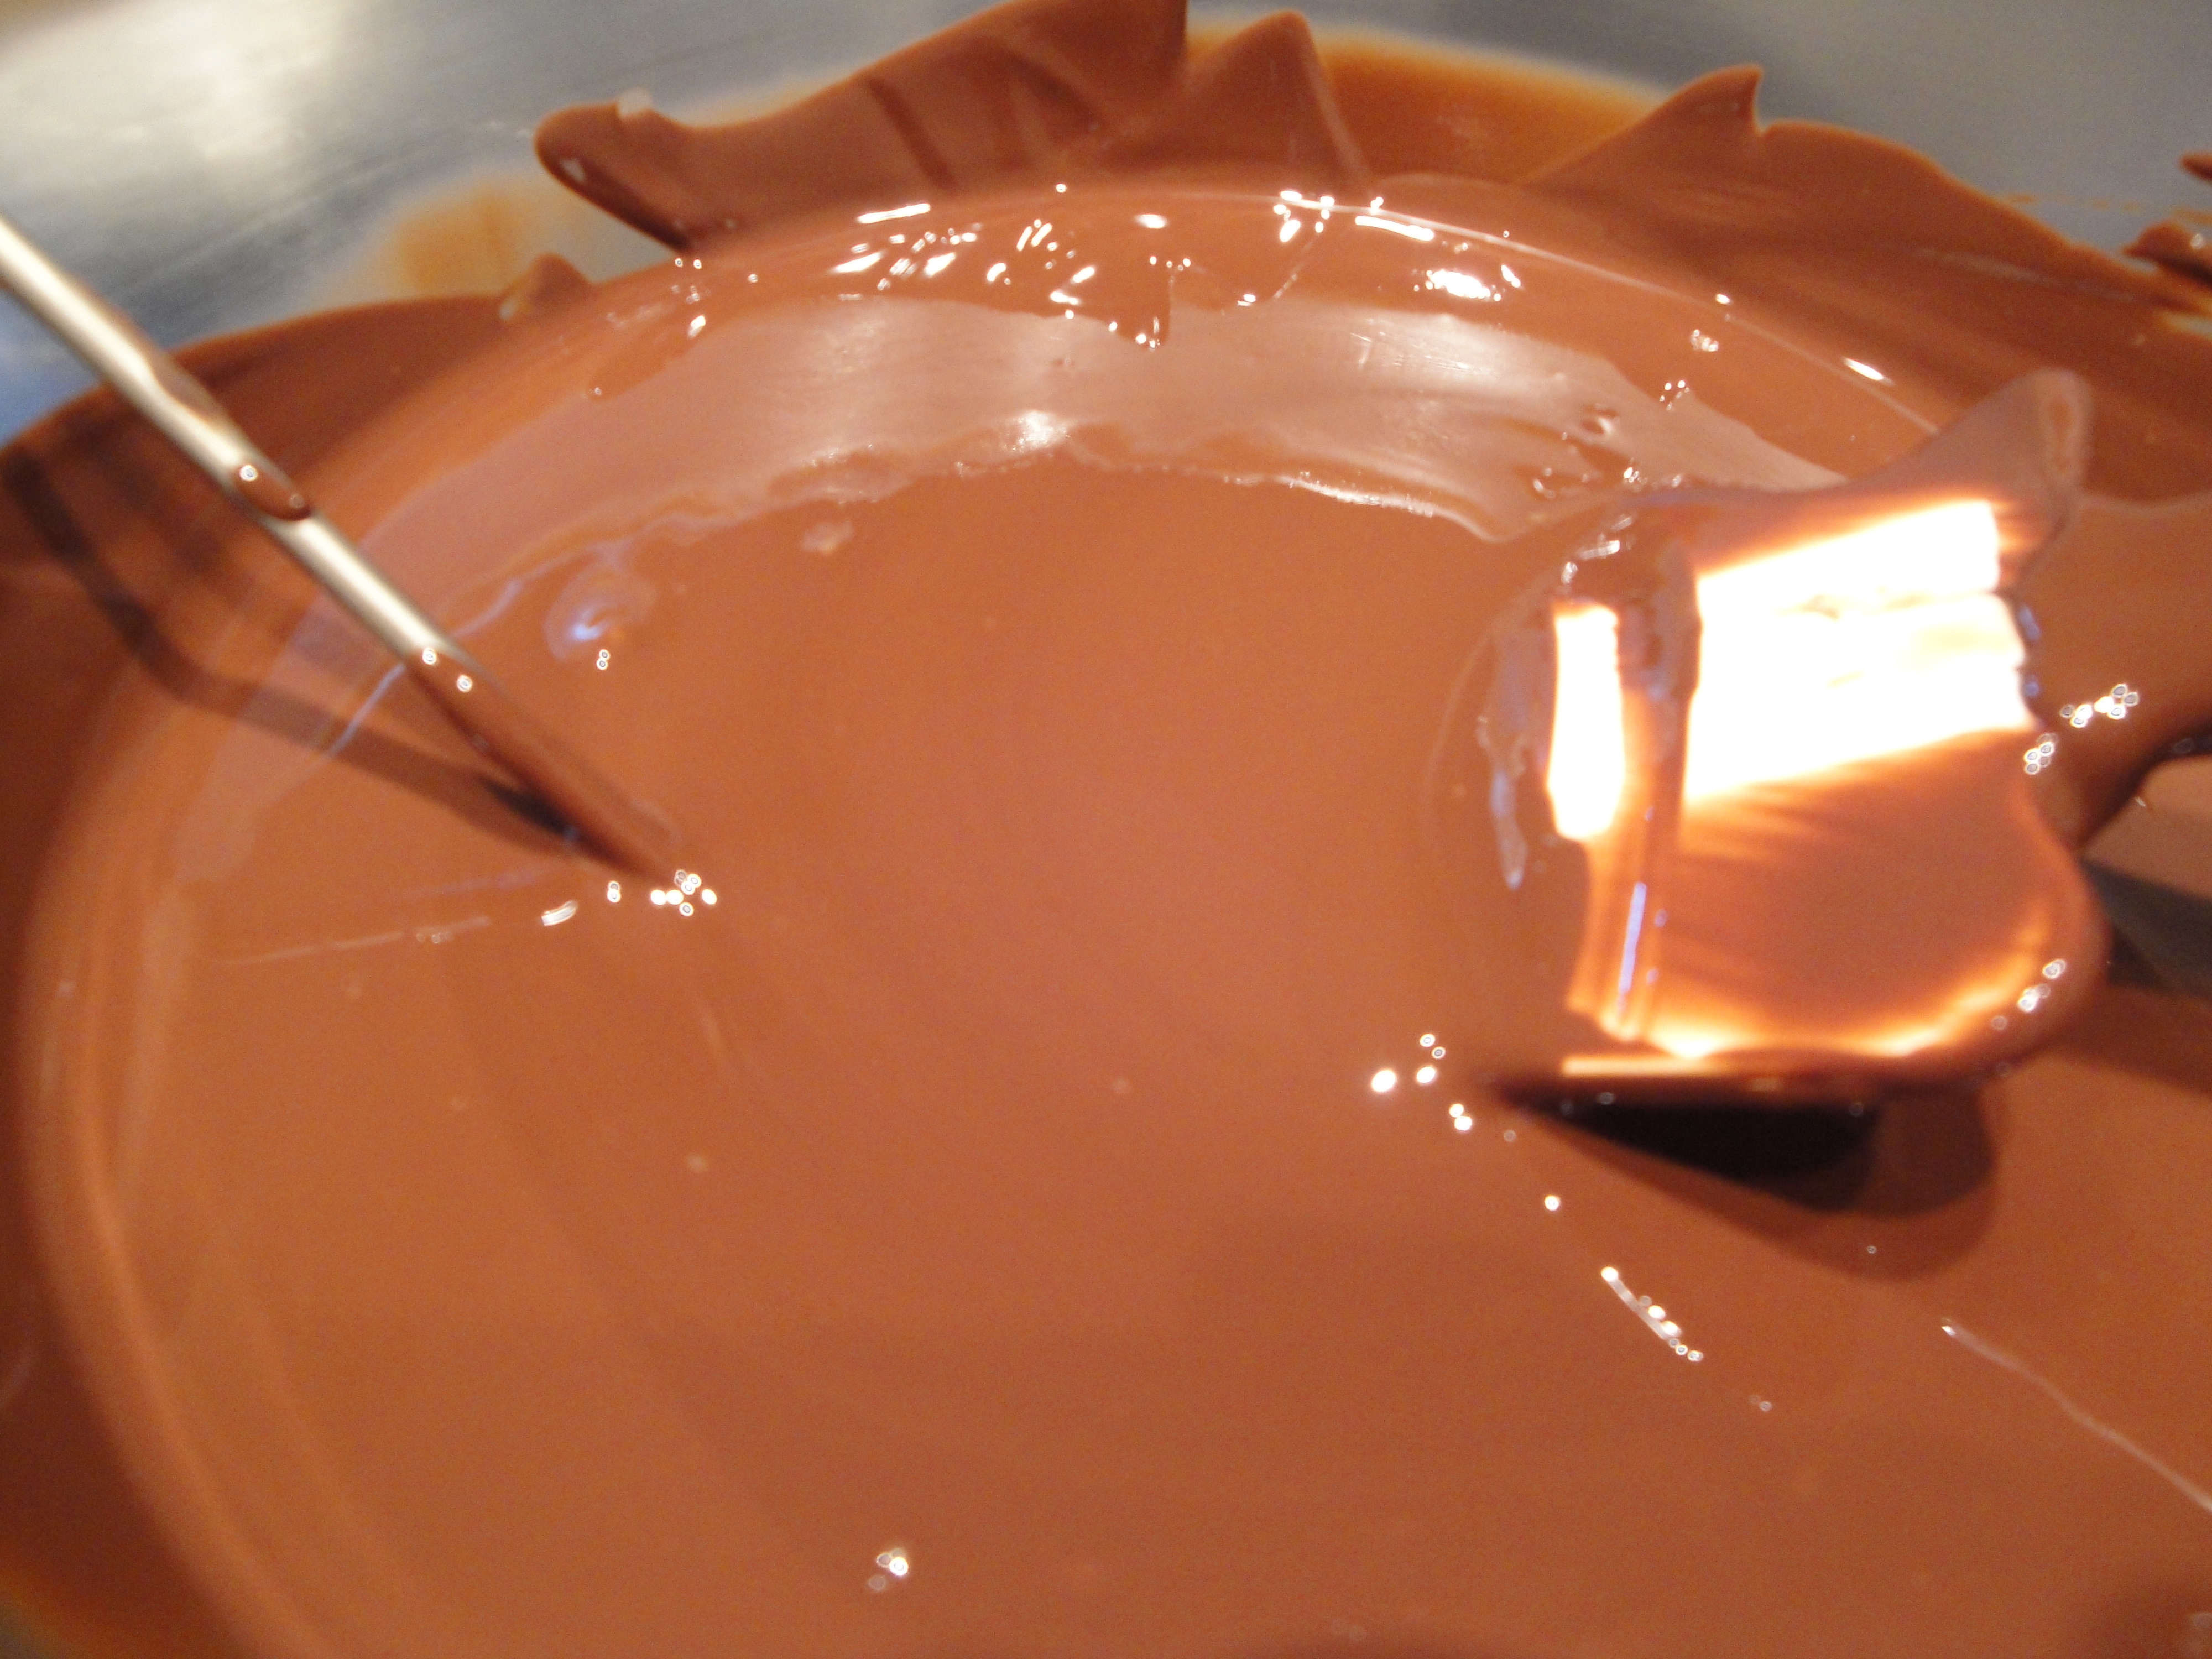 What is chocolate tempering & what are cocoa butter crystals?